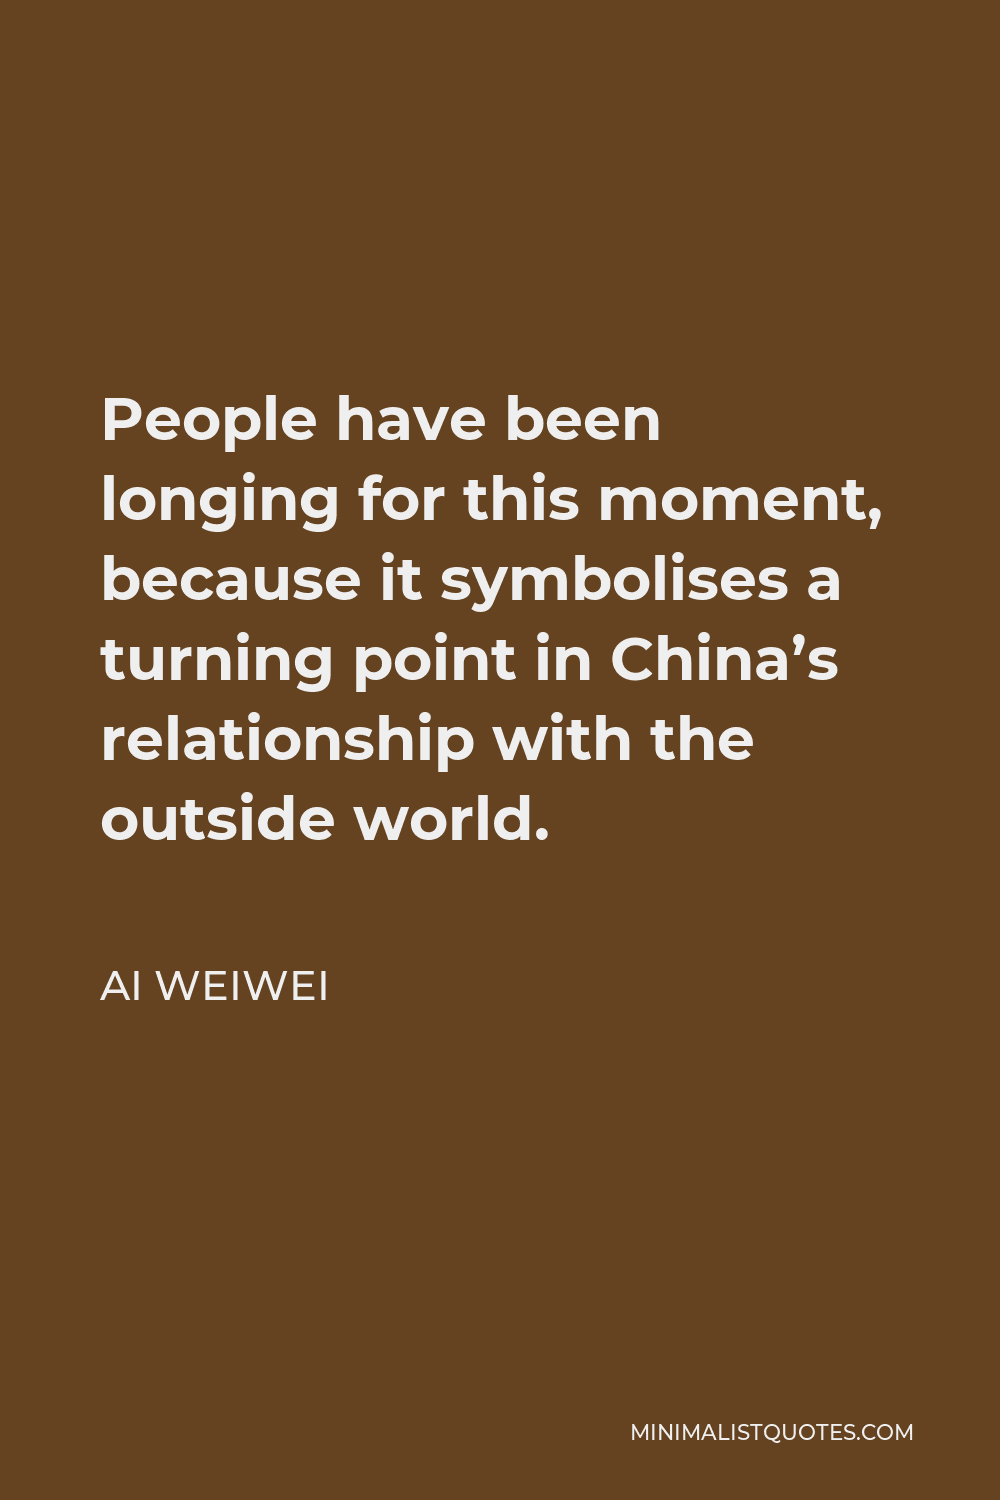 Ai Weiwei Quote - People have been longing for this moment, because it symbolises a turning point in China’s relationship with the outside world.